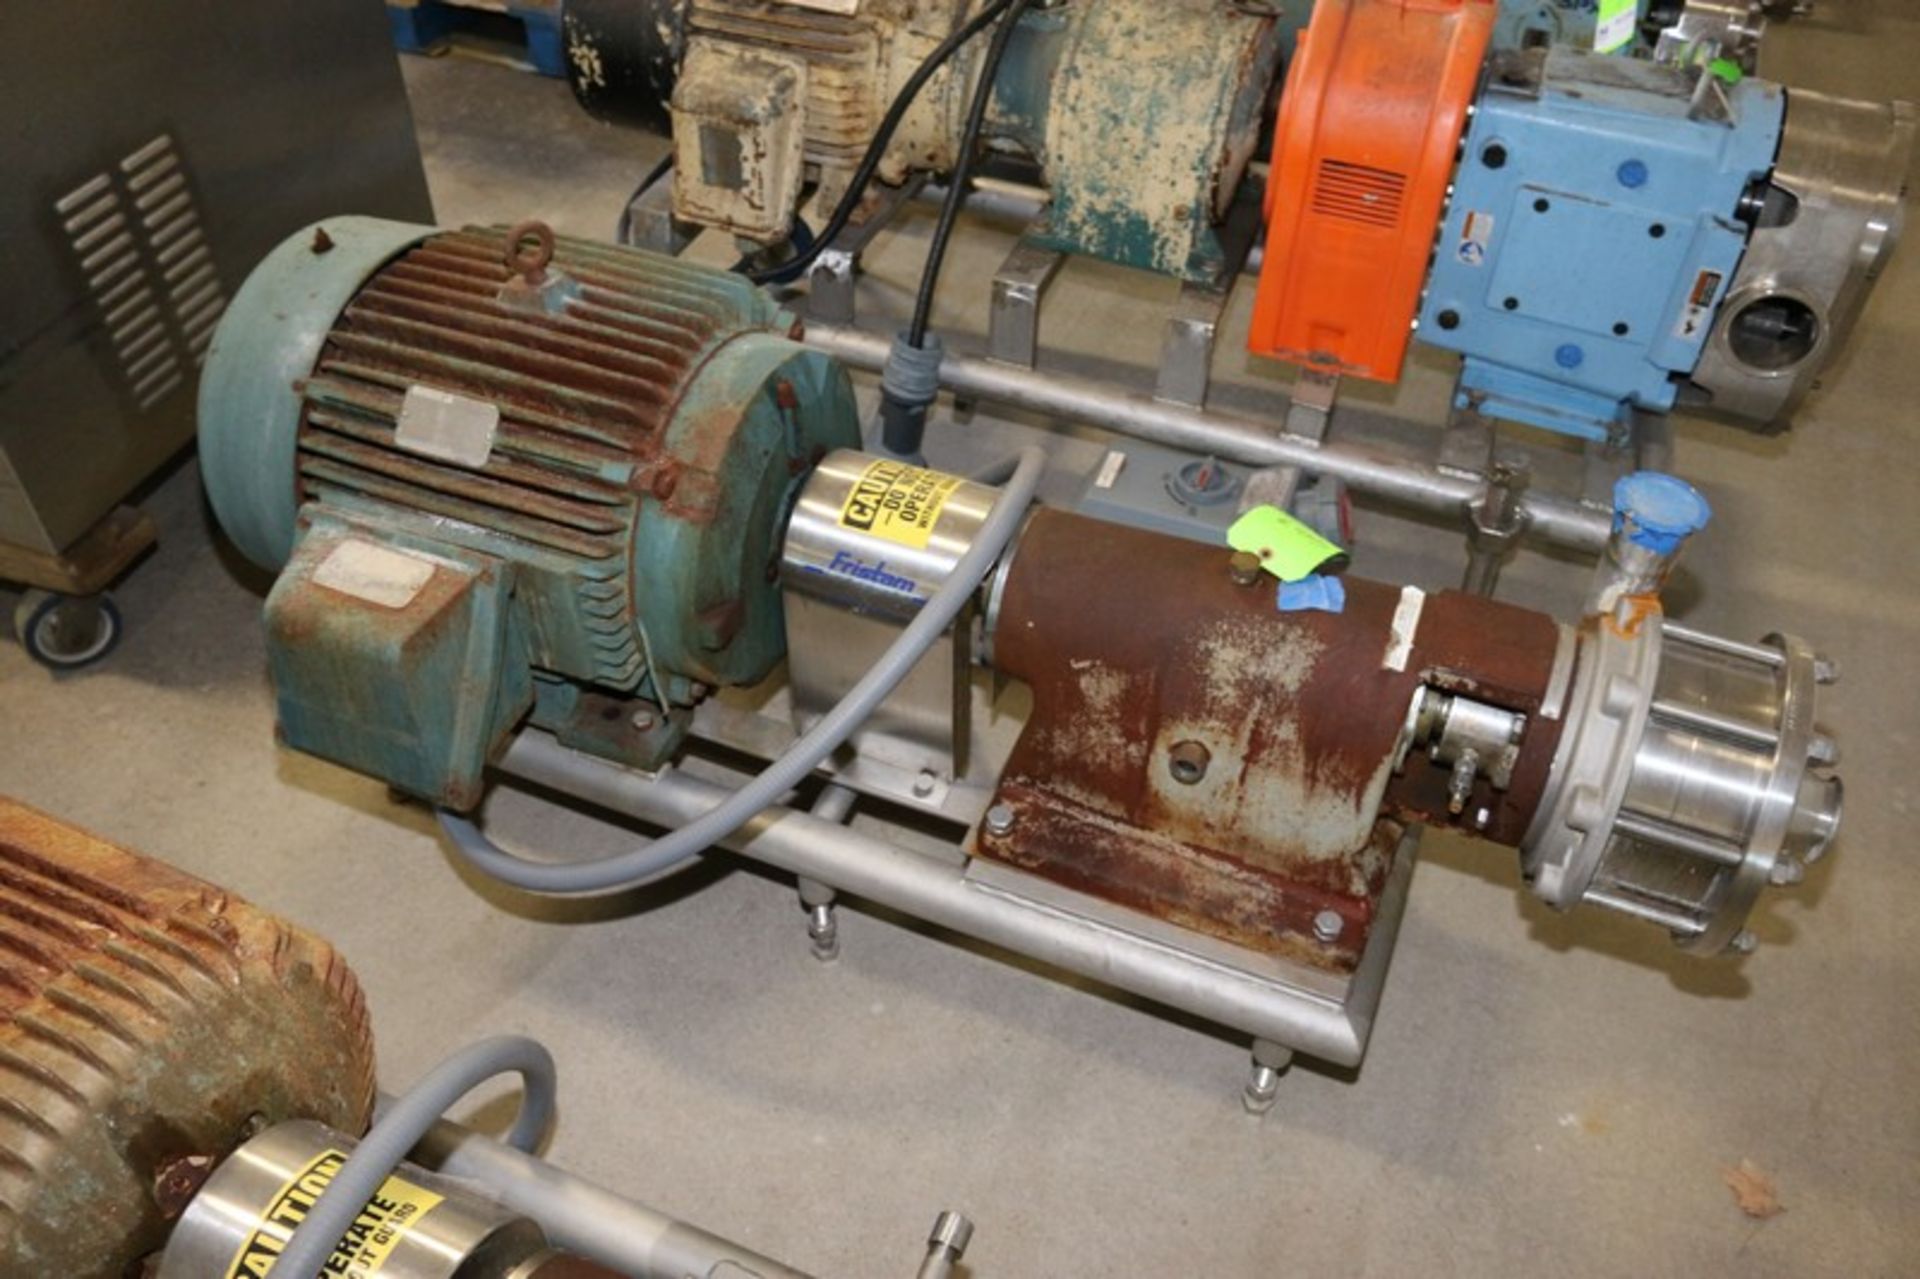 Fristam 40 hp Centrifugal Pump, M/N FM332-175, S/N FM33297319, with Reliance 3560 RPM Motor, with - Image 5 of 5